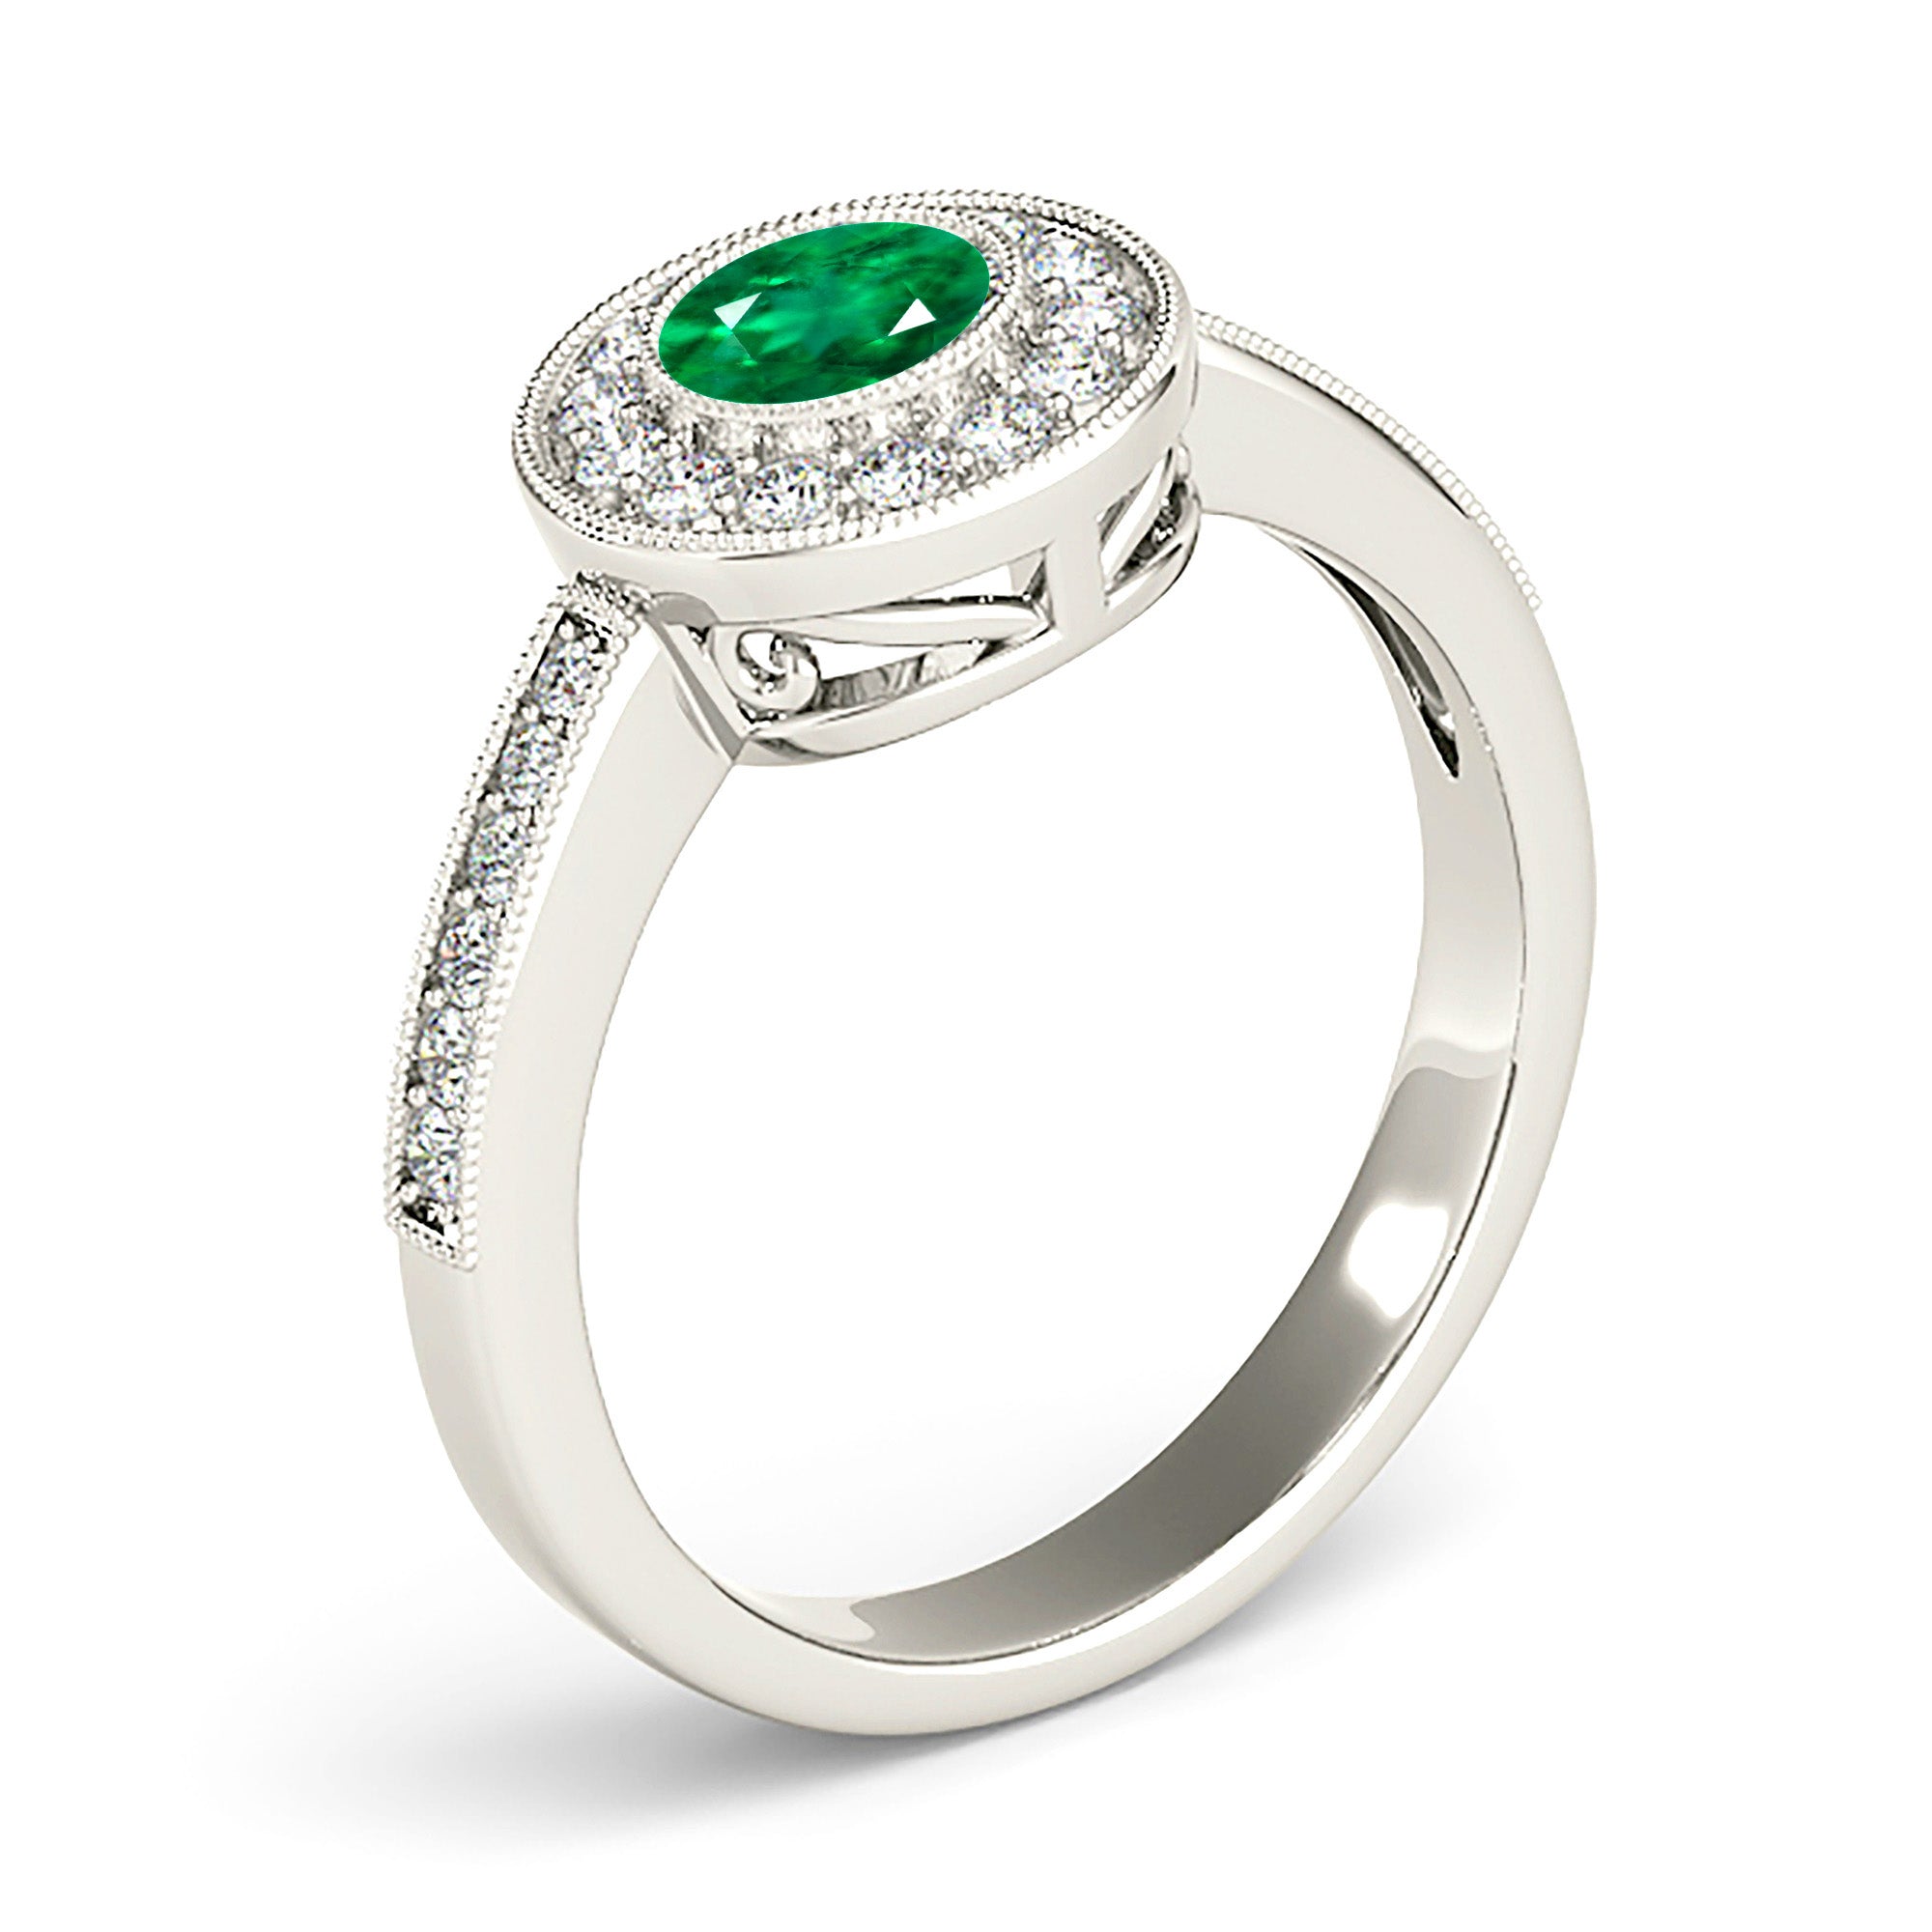 1.00 ct. Genuine Emerald Ring With 0.25 ctw. Channel Set Halo And Delicate Band, Milgrain design-in 14K/18K White, Yellow, Rose Gold and Platinum - Christmas Jewelry Gift -VIRABYANI